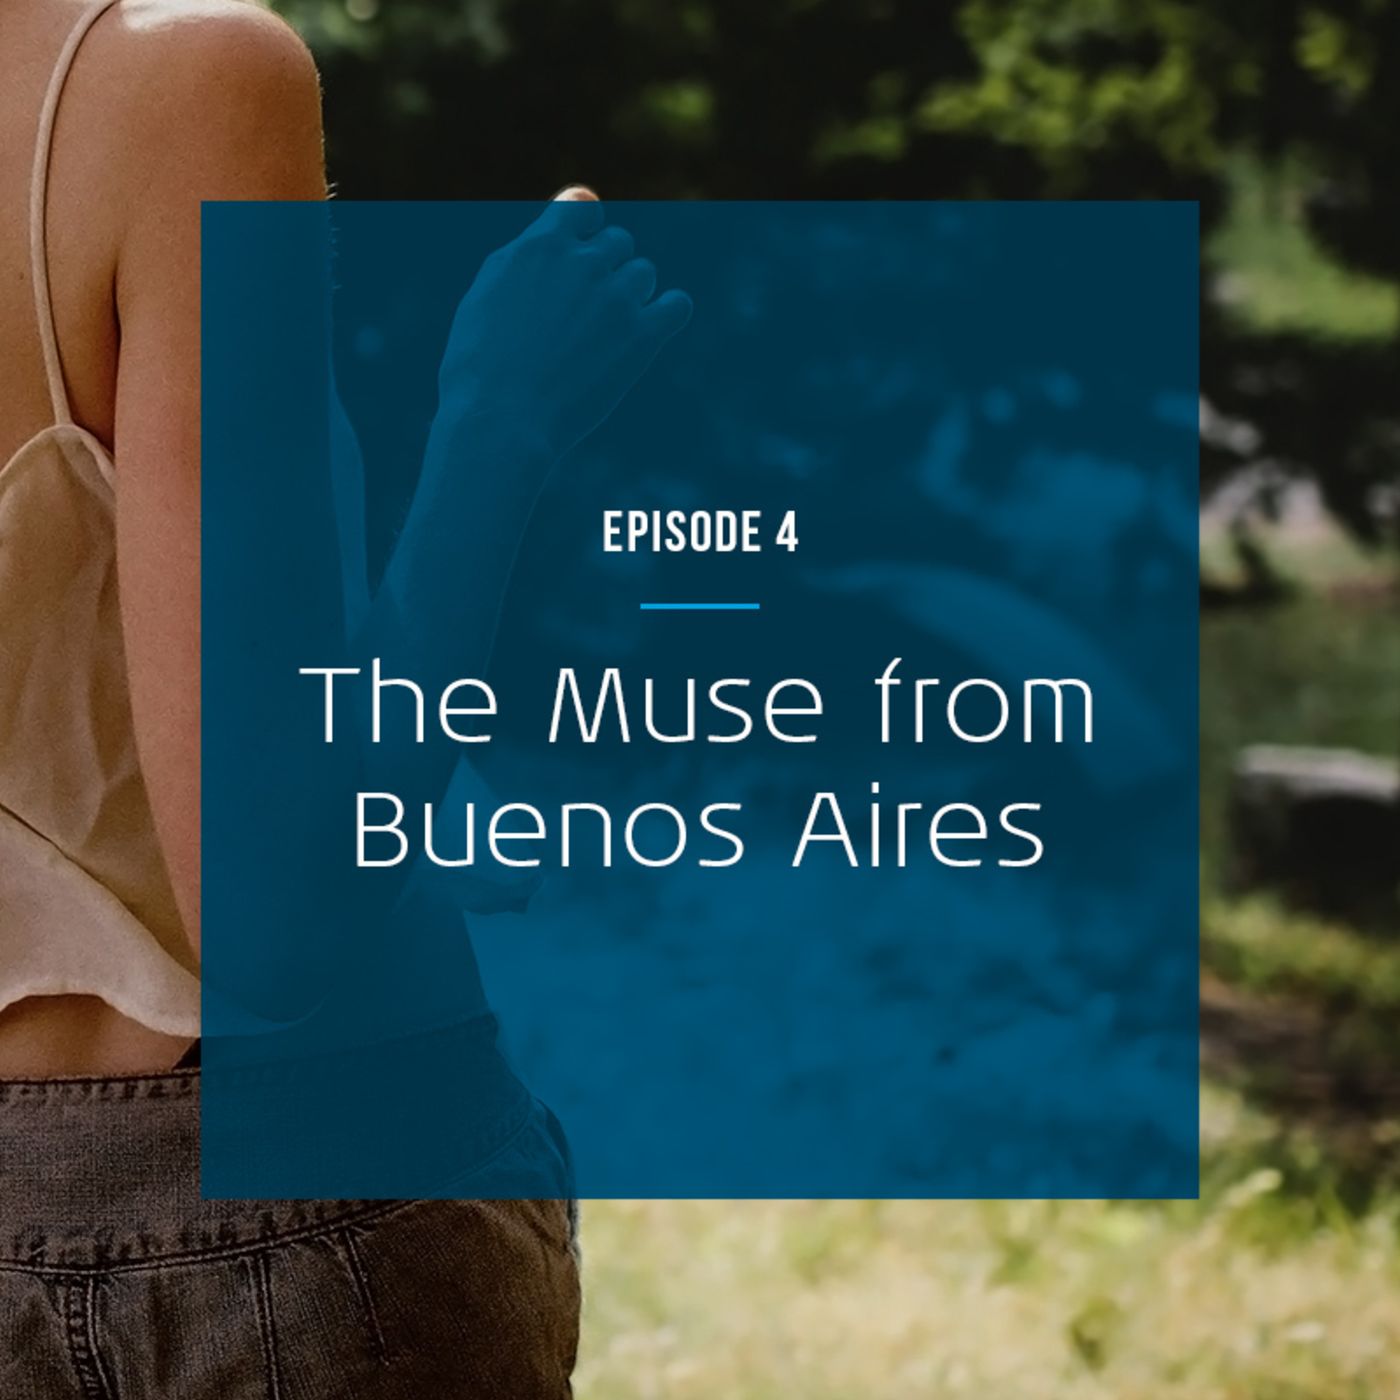 The Muse from Buenos Aires